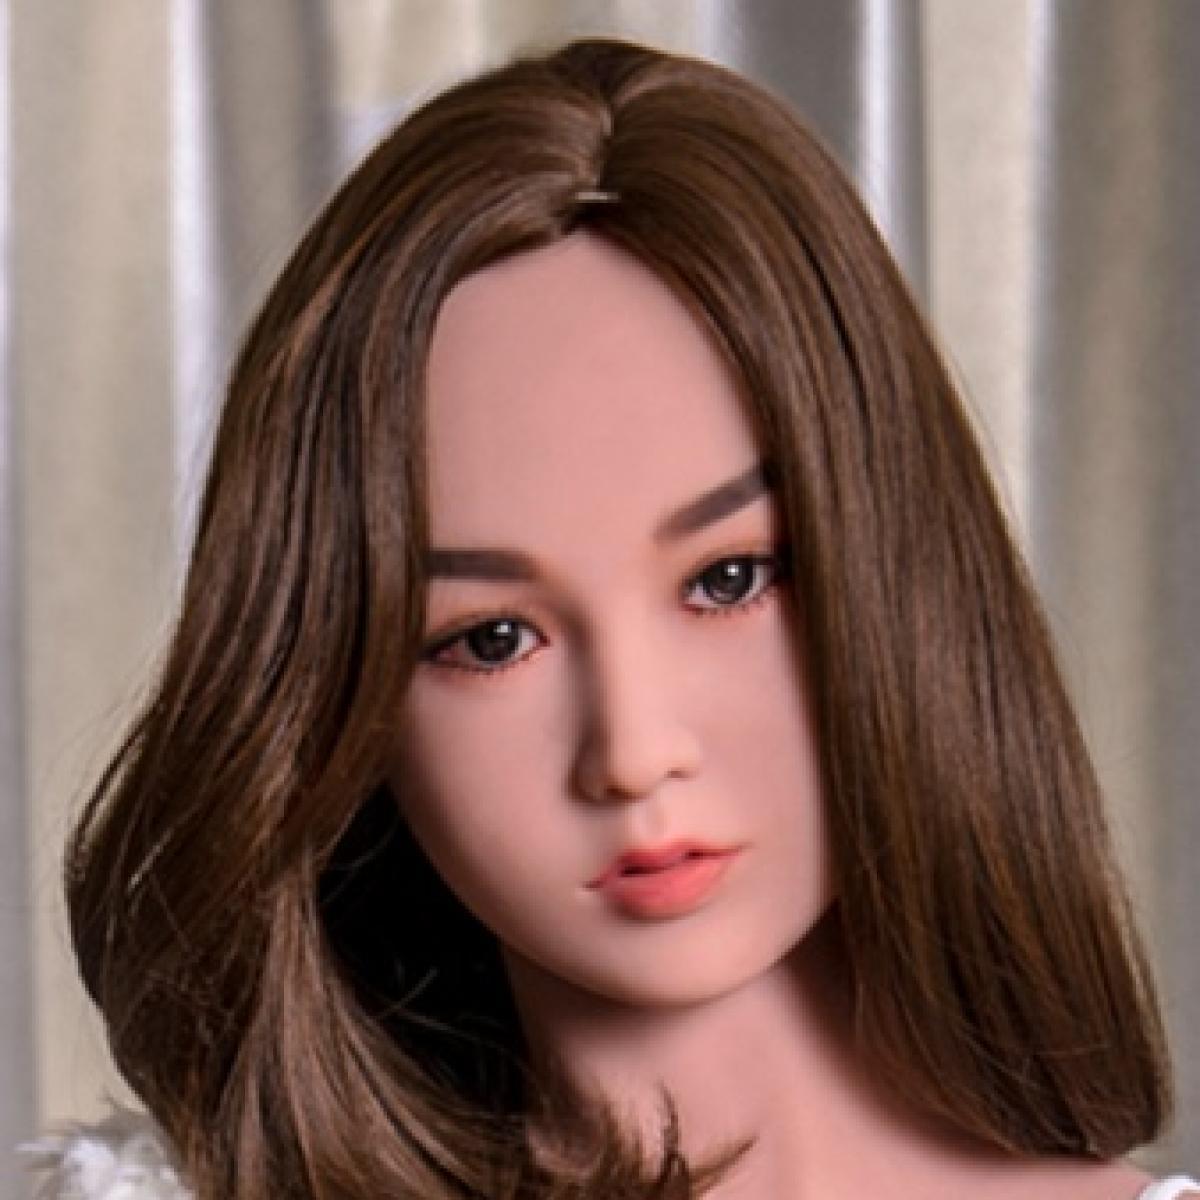 Firedoll - Florence - Sex Doll Head - M16 Compatible - Light Tan - Lucidtoys